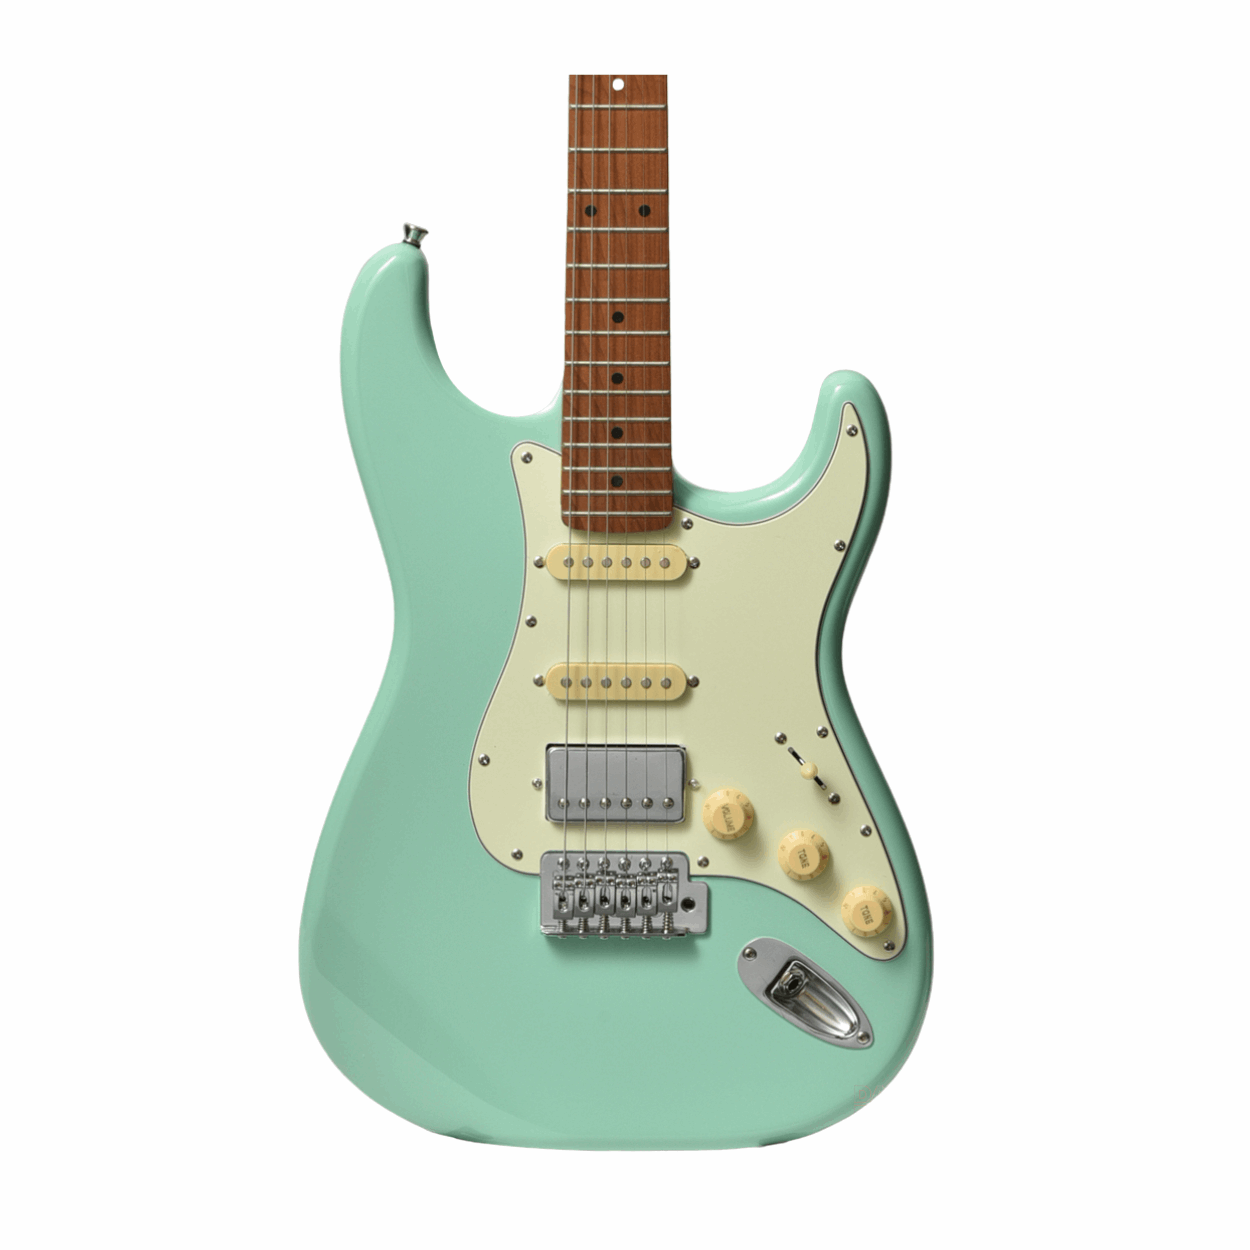 Bacchus Bst-2-rsm/m-sfg Universe Series Roasted Maple Electric Guitar, Seafoam Green With Bag